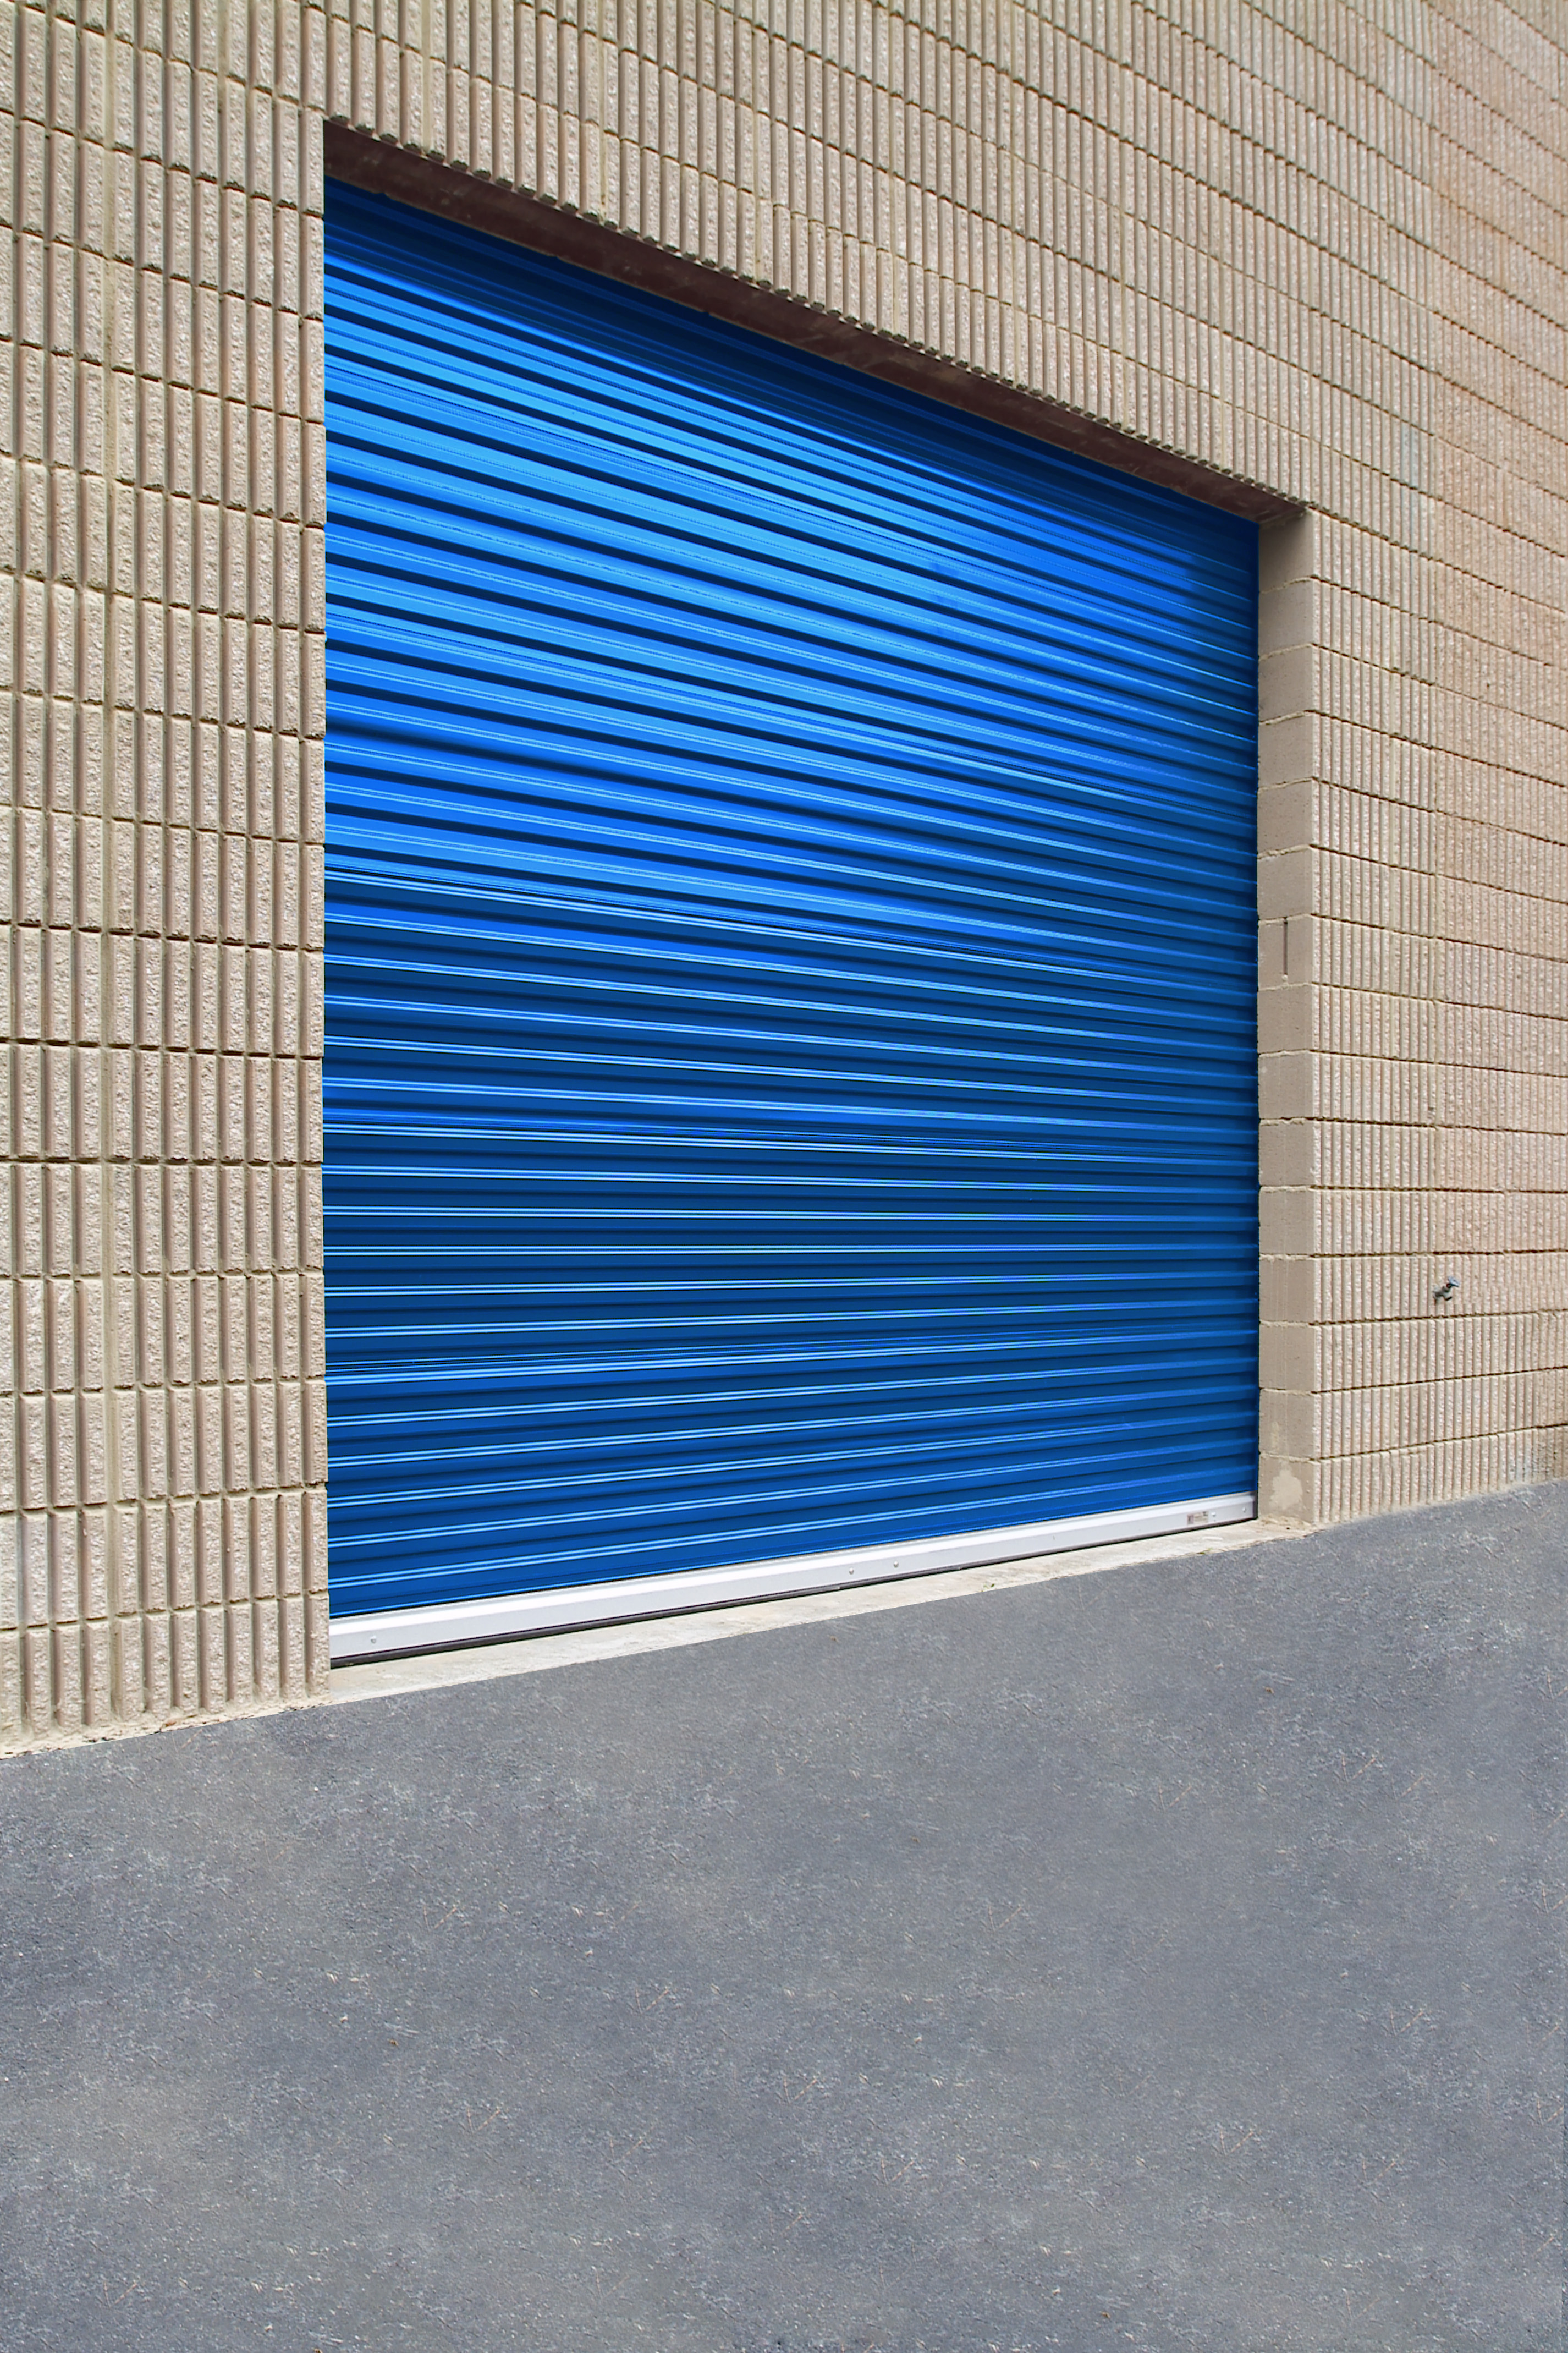 What are the Benefits of an Insulated Roll up Door?